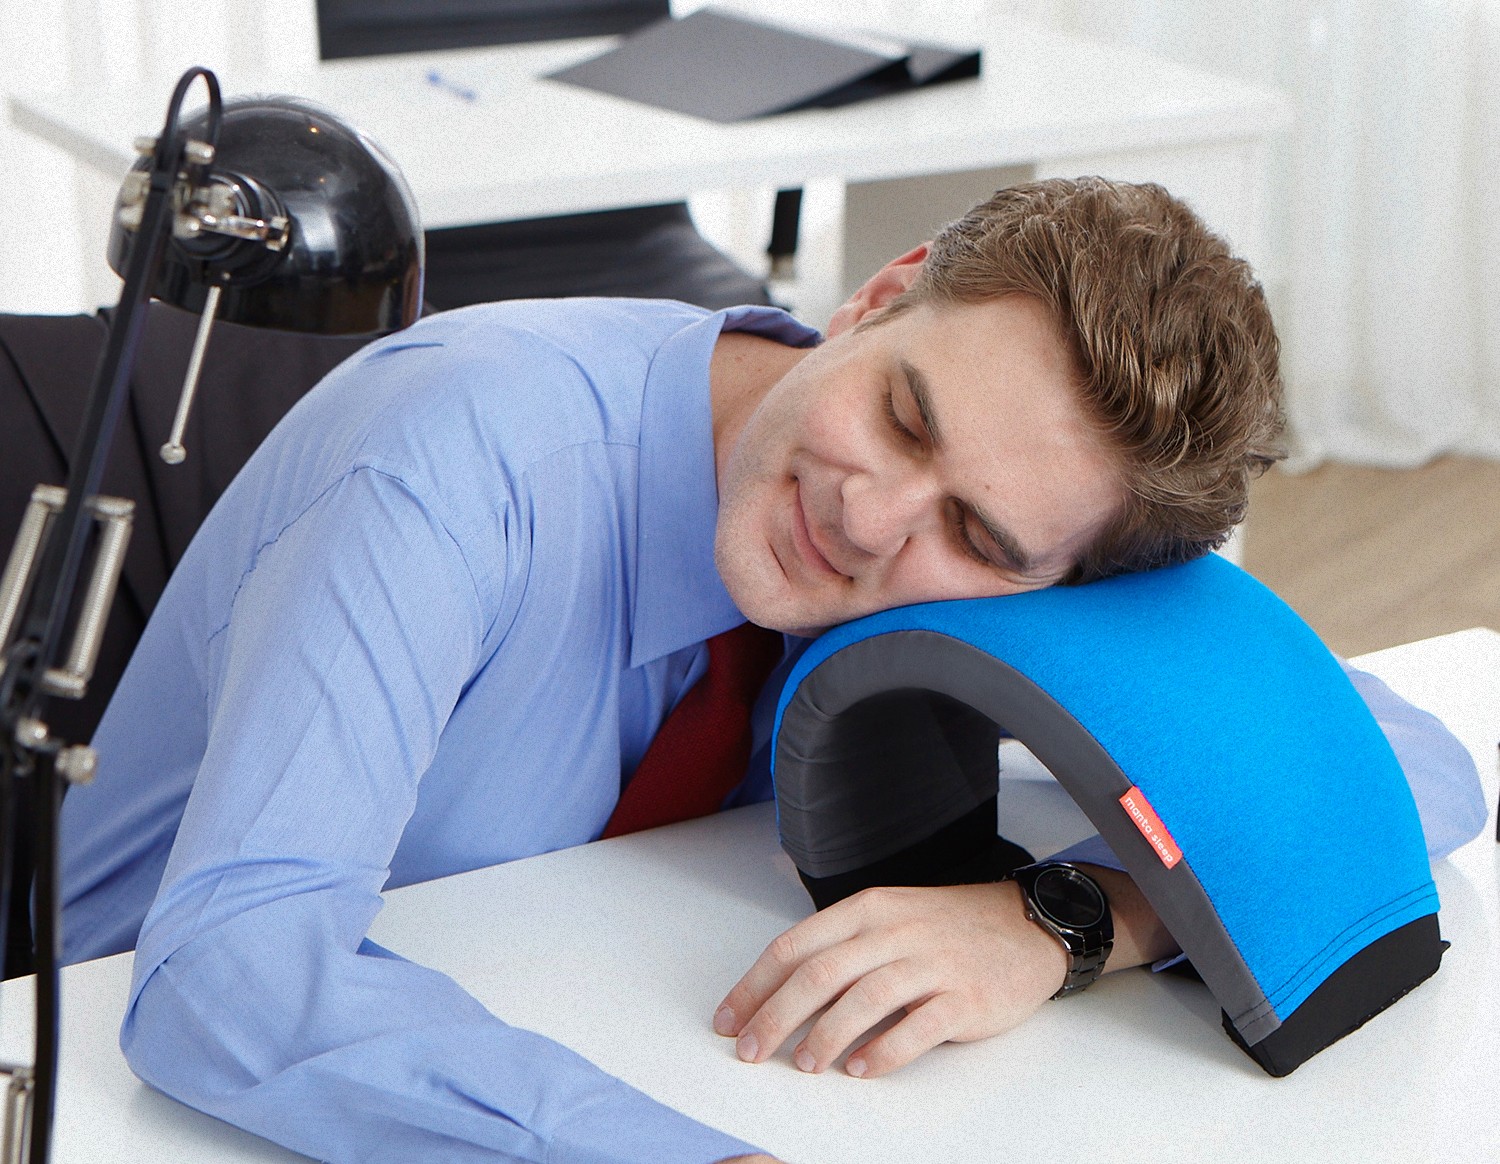 A man power napping on his work desk, using an arc-shaped blue nap.